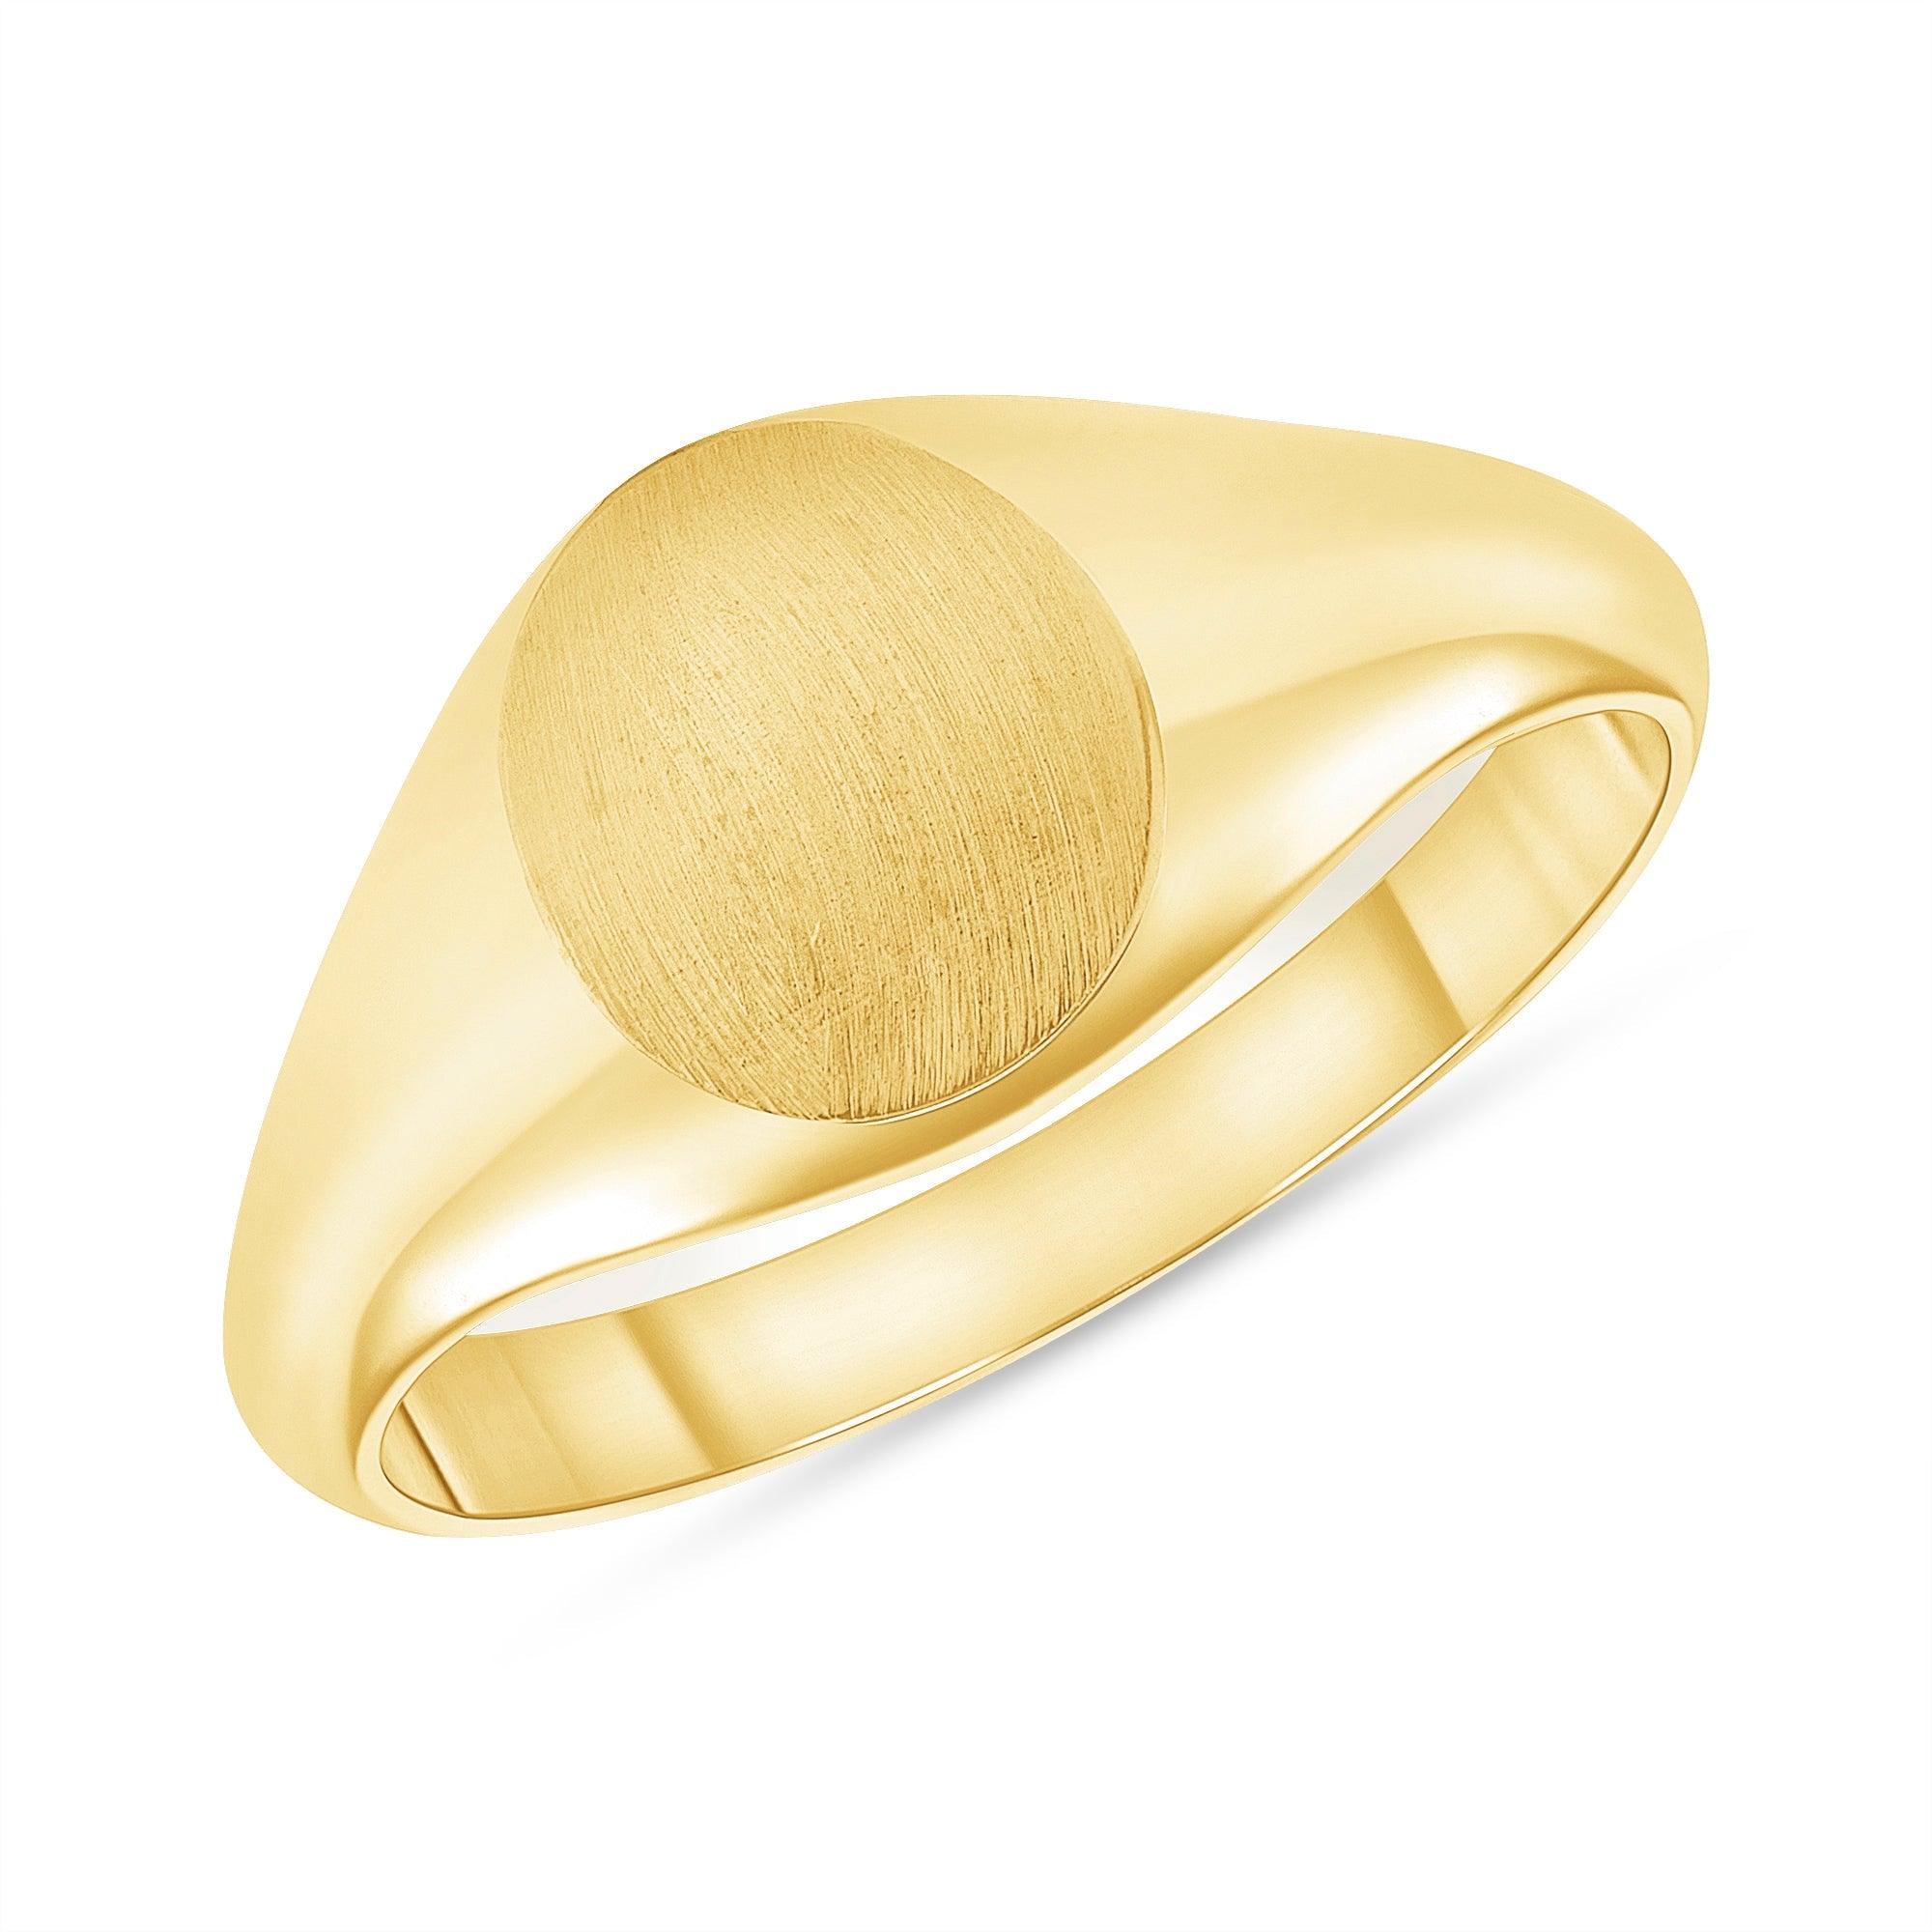 Round Gold Signet Ring for Everyday Casual Wear from Rafi's Jewelry